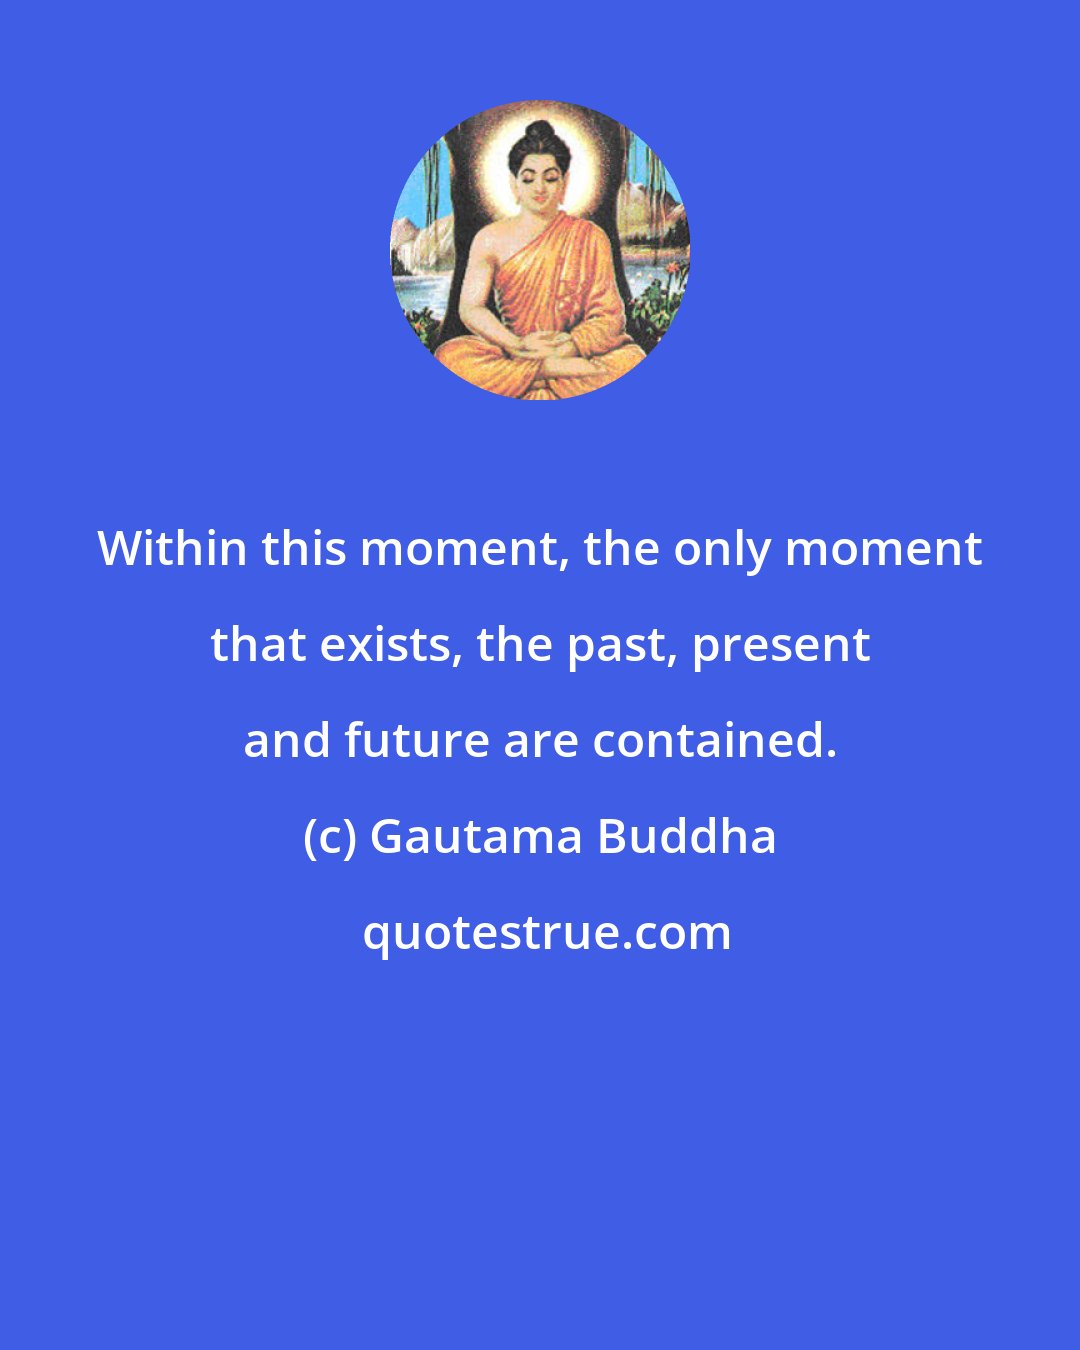 Gautama Buddha: Within this moment, the only moment that exists, the past, present and future are contained.